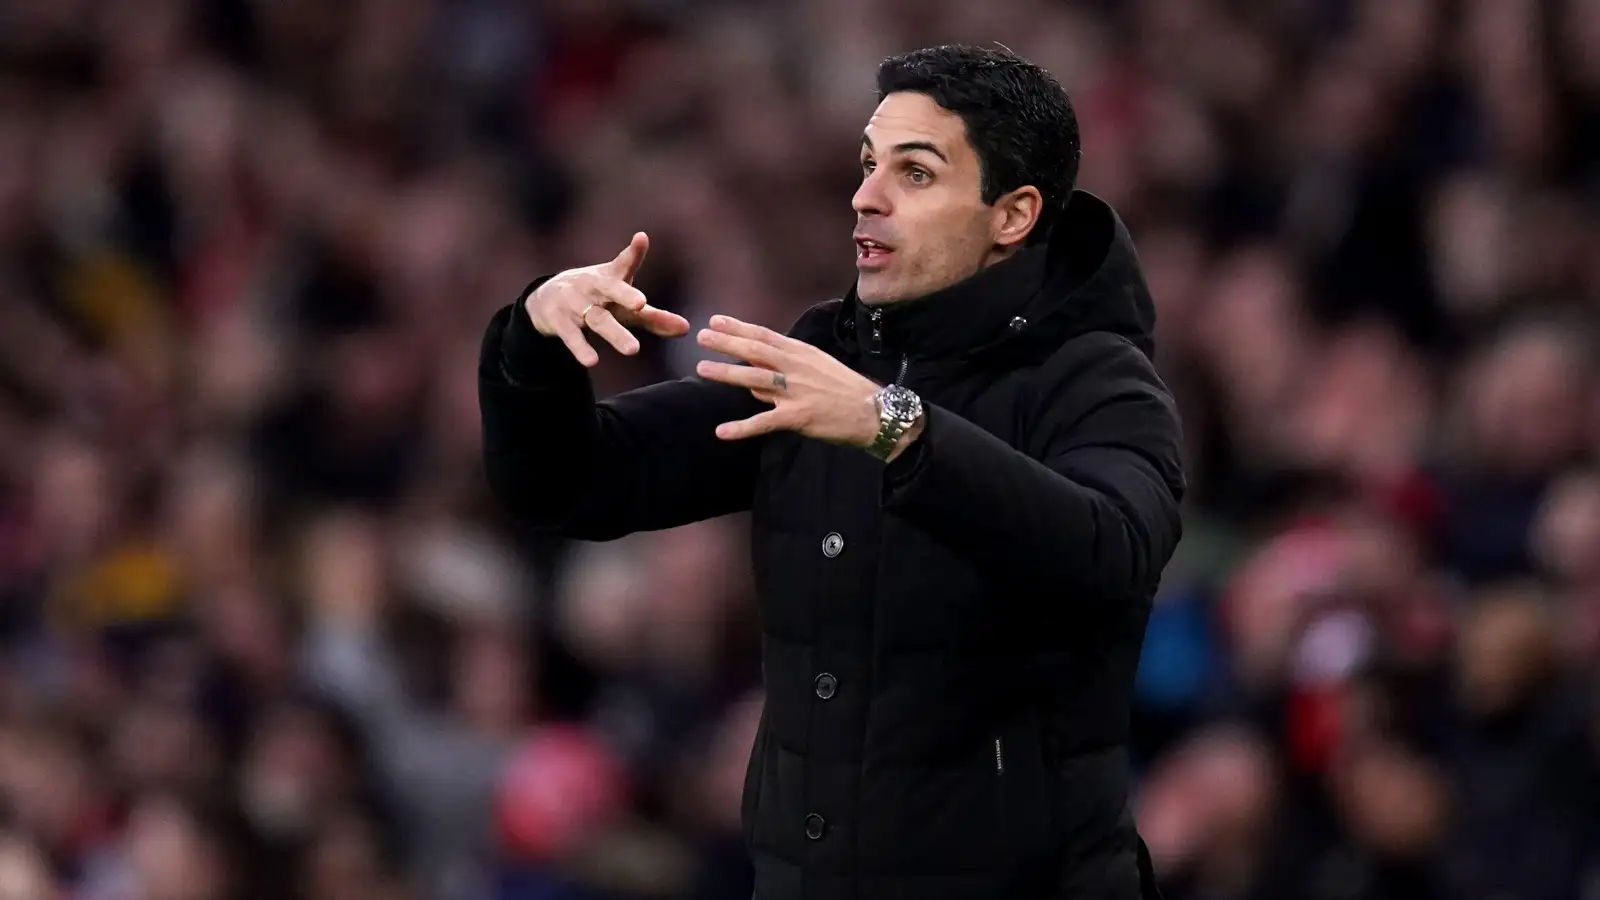 Analysing Mikel Arteta’s Arsenal record against each of the Big Six